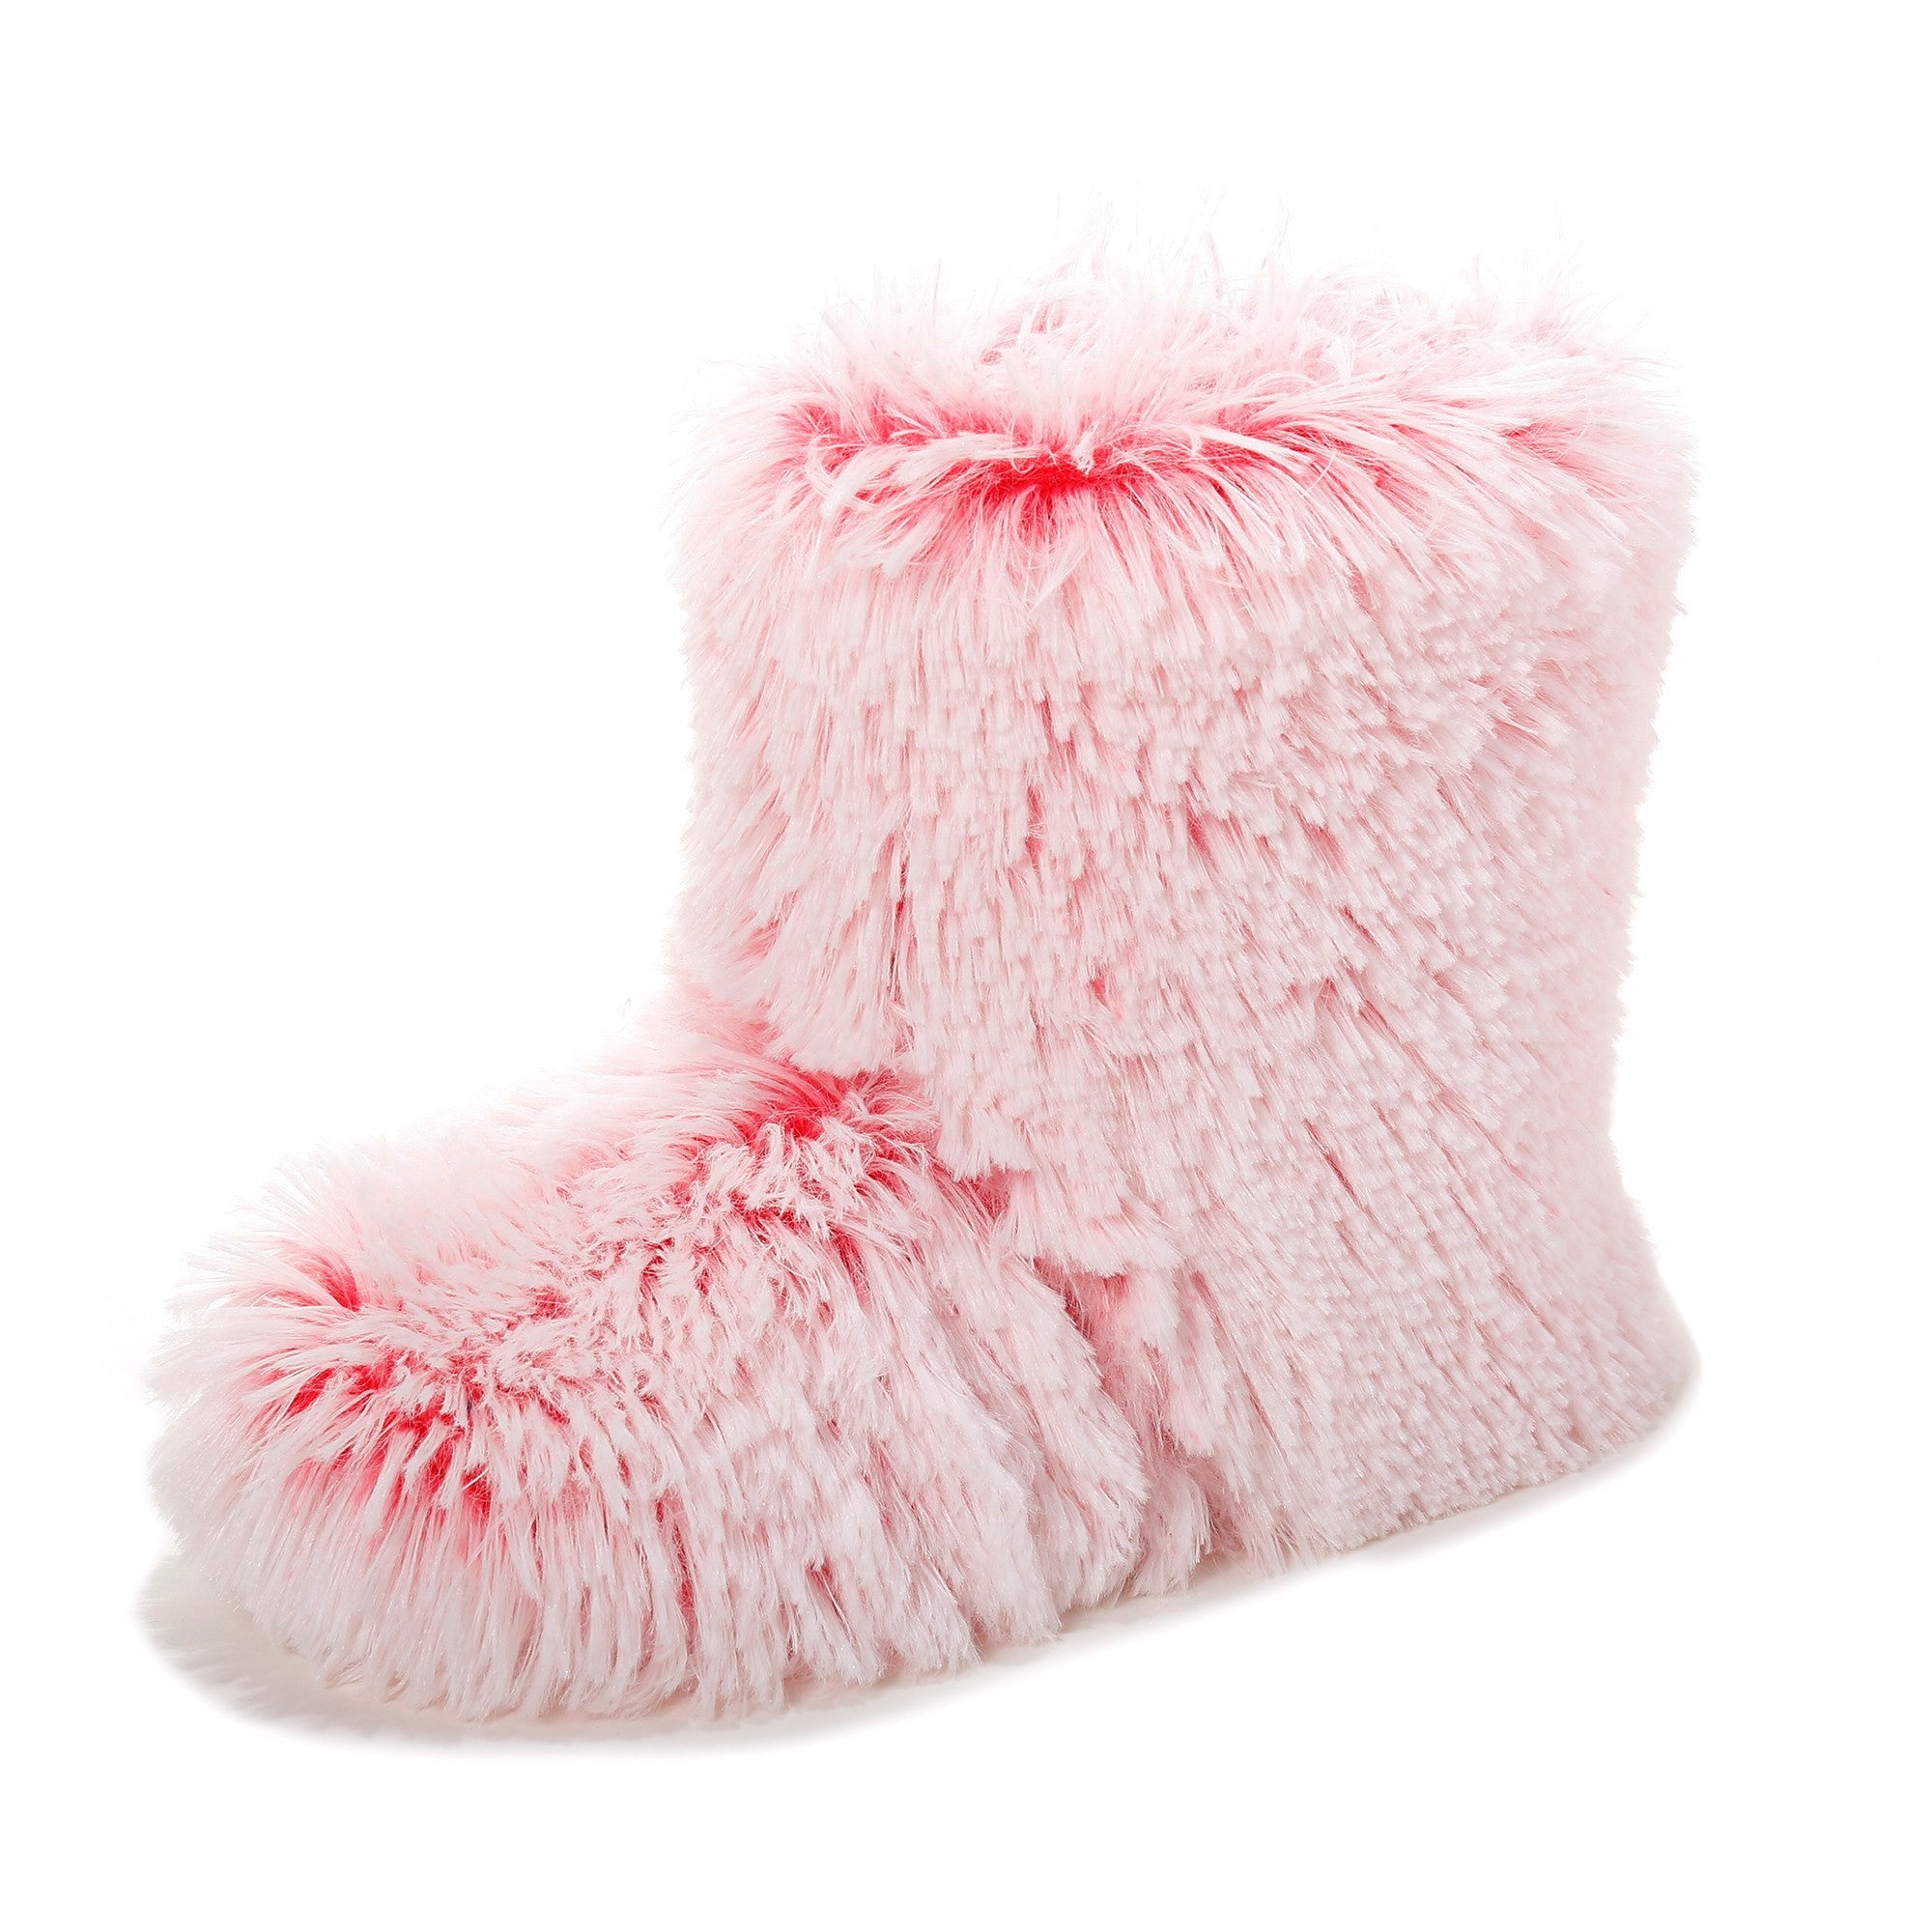 pink boot slippers